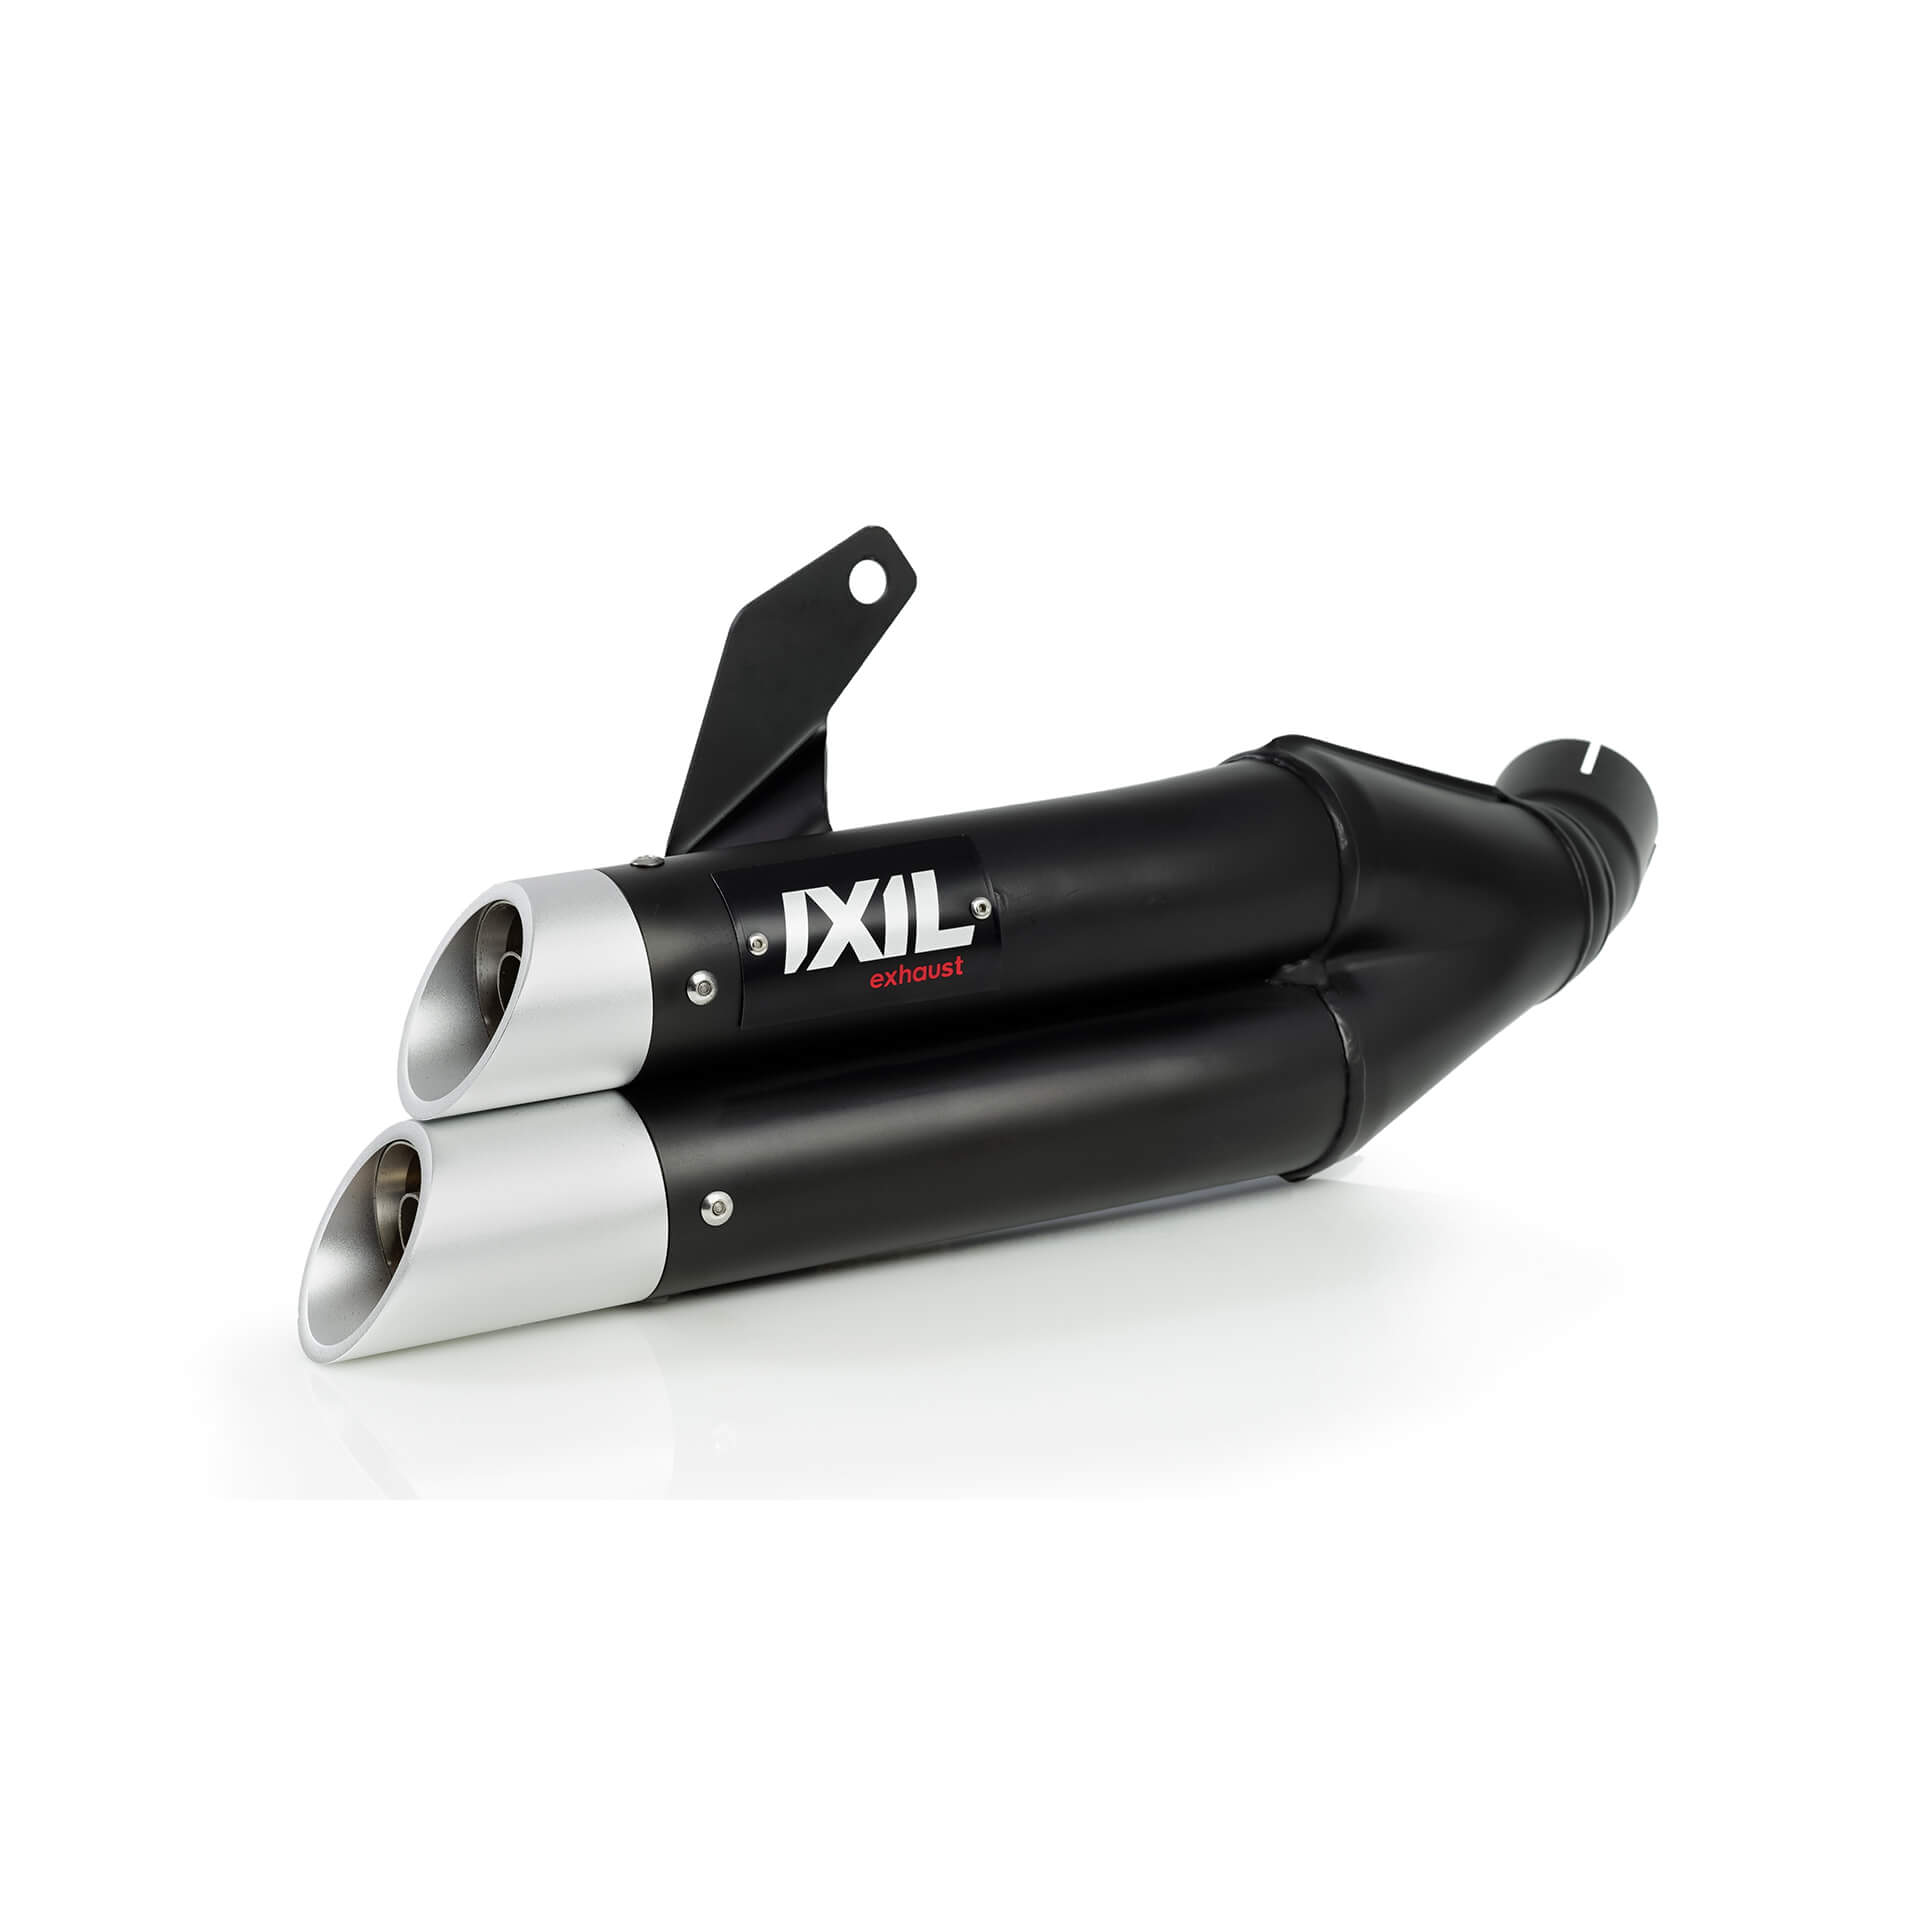 IXIL complete system Hyperlow black XL, stainless steel, CB 650 F/CBR 650 F, 14-